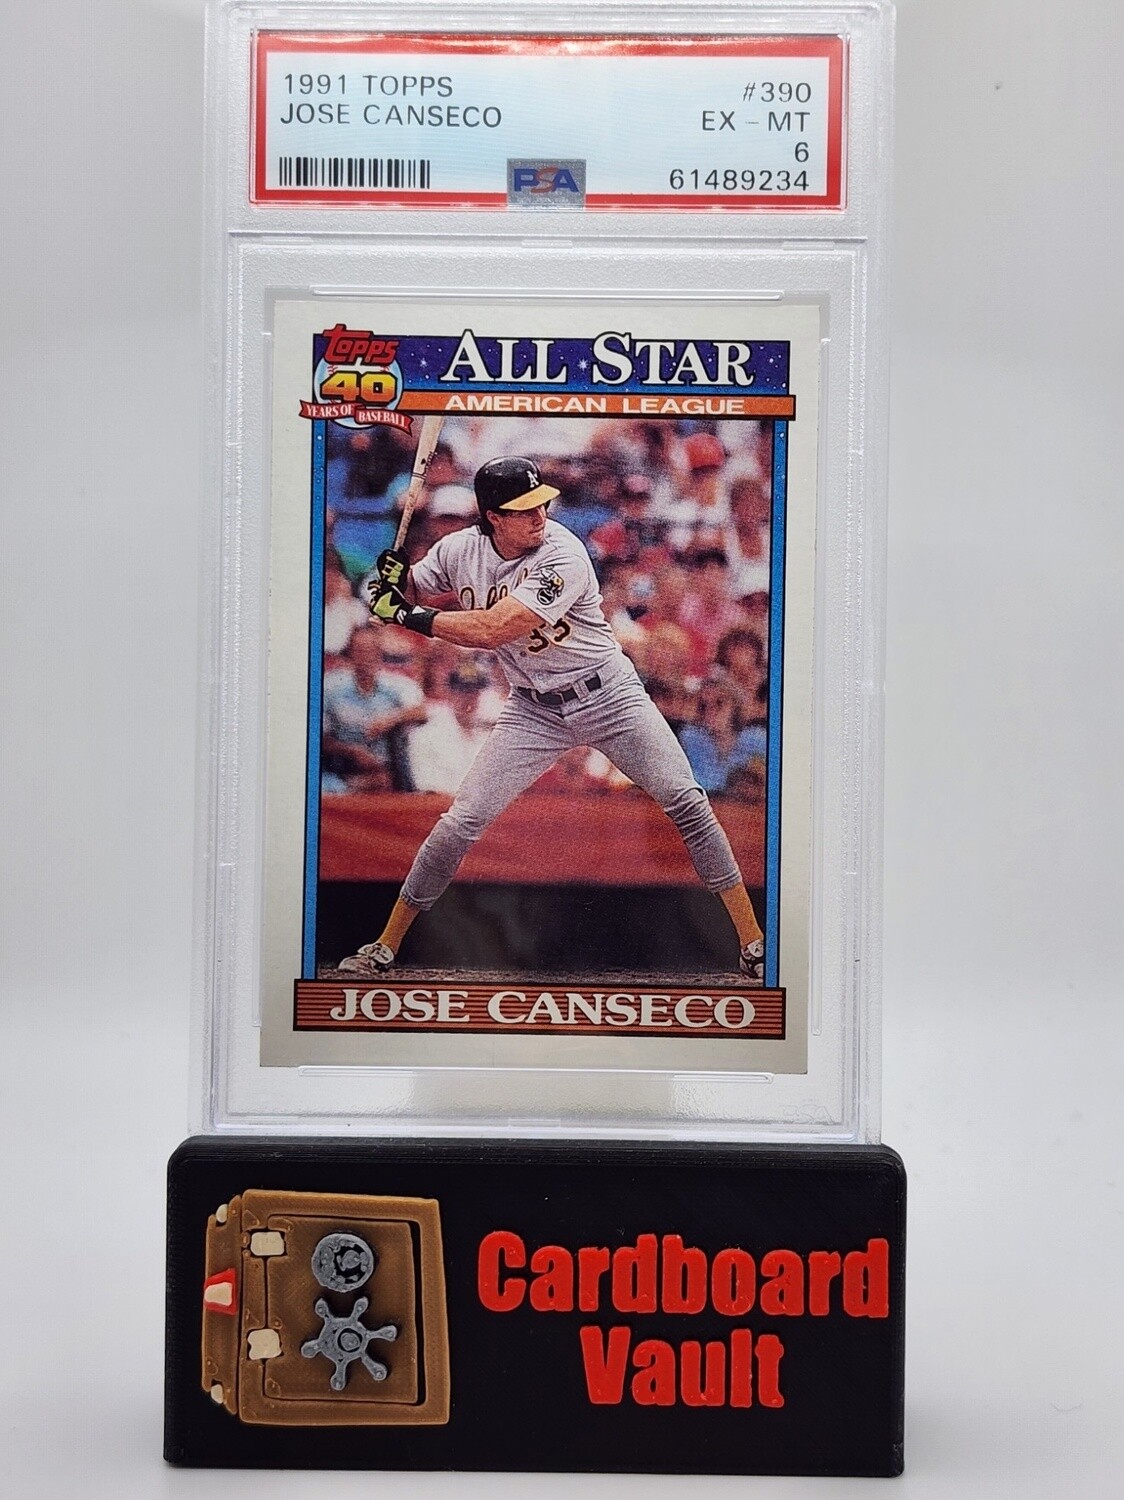 1991 Topps Jose Canseco #390 PSA 6